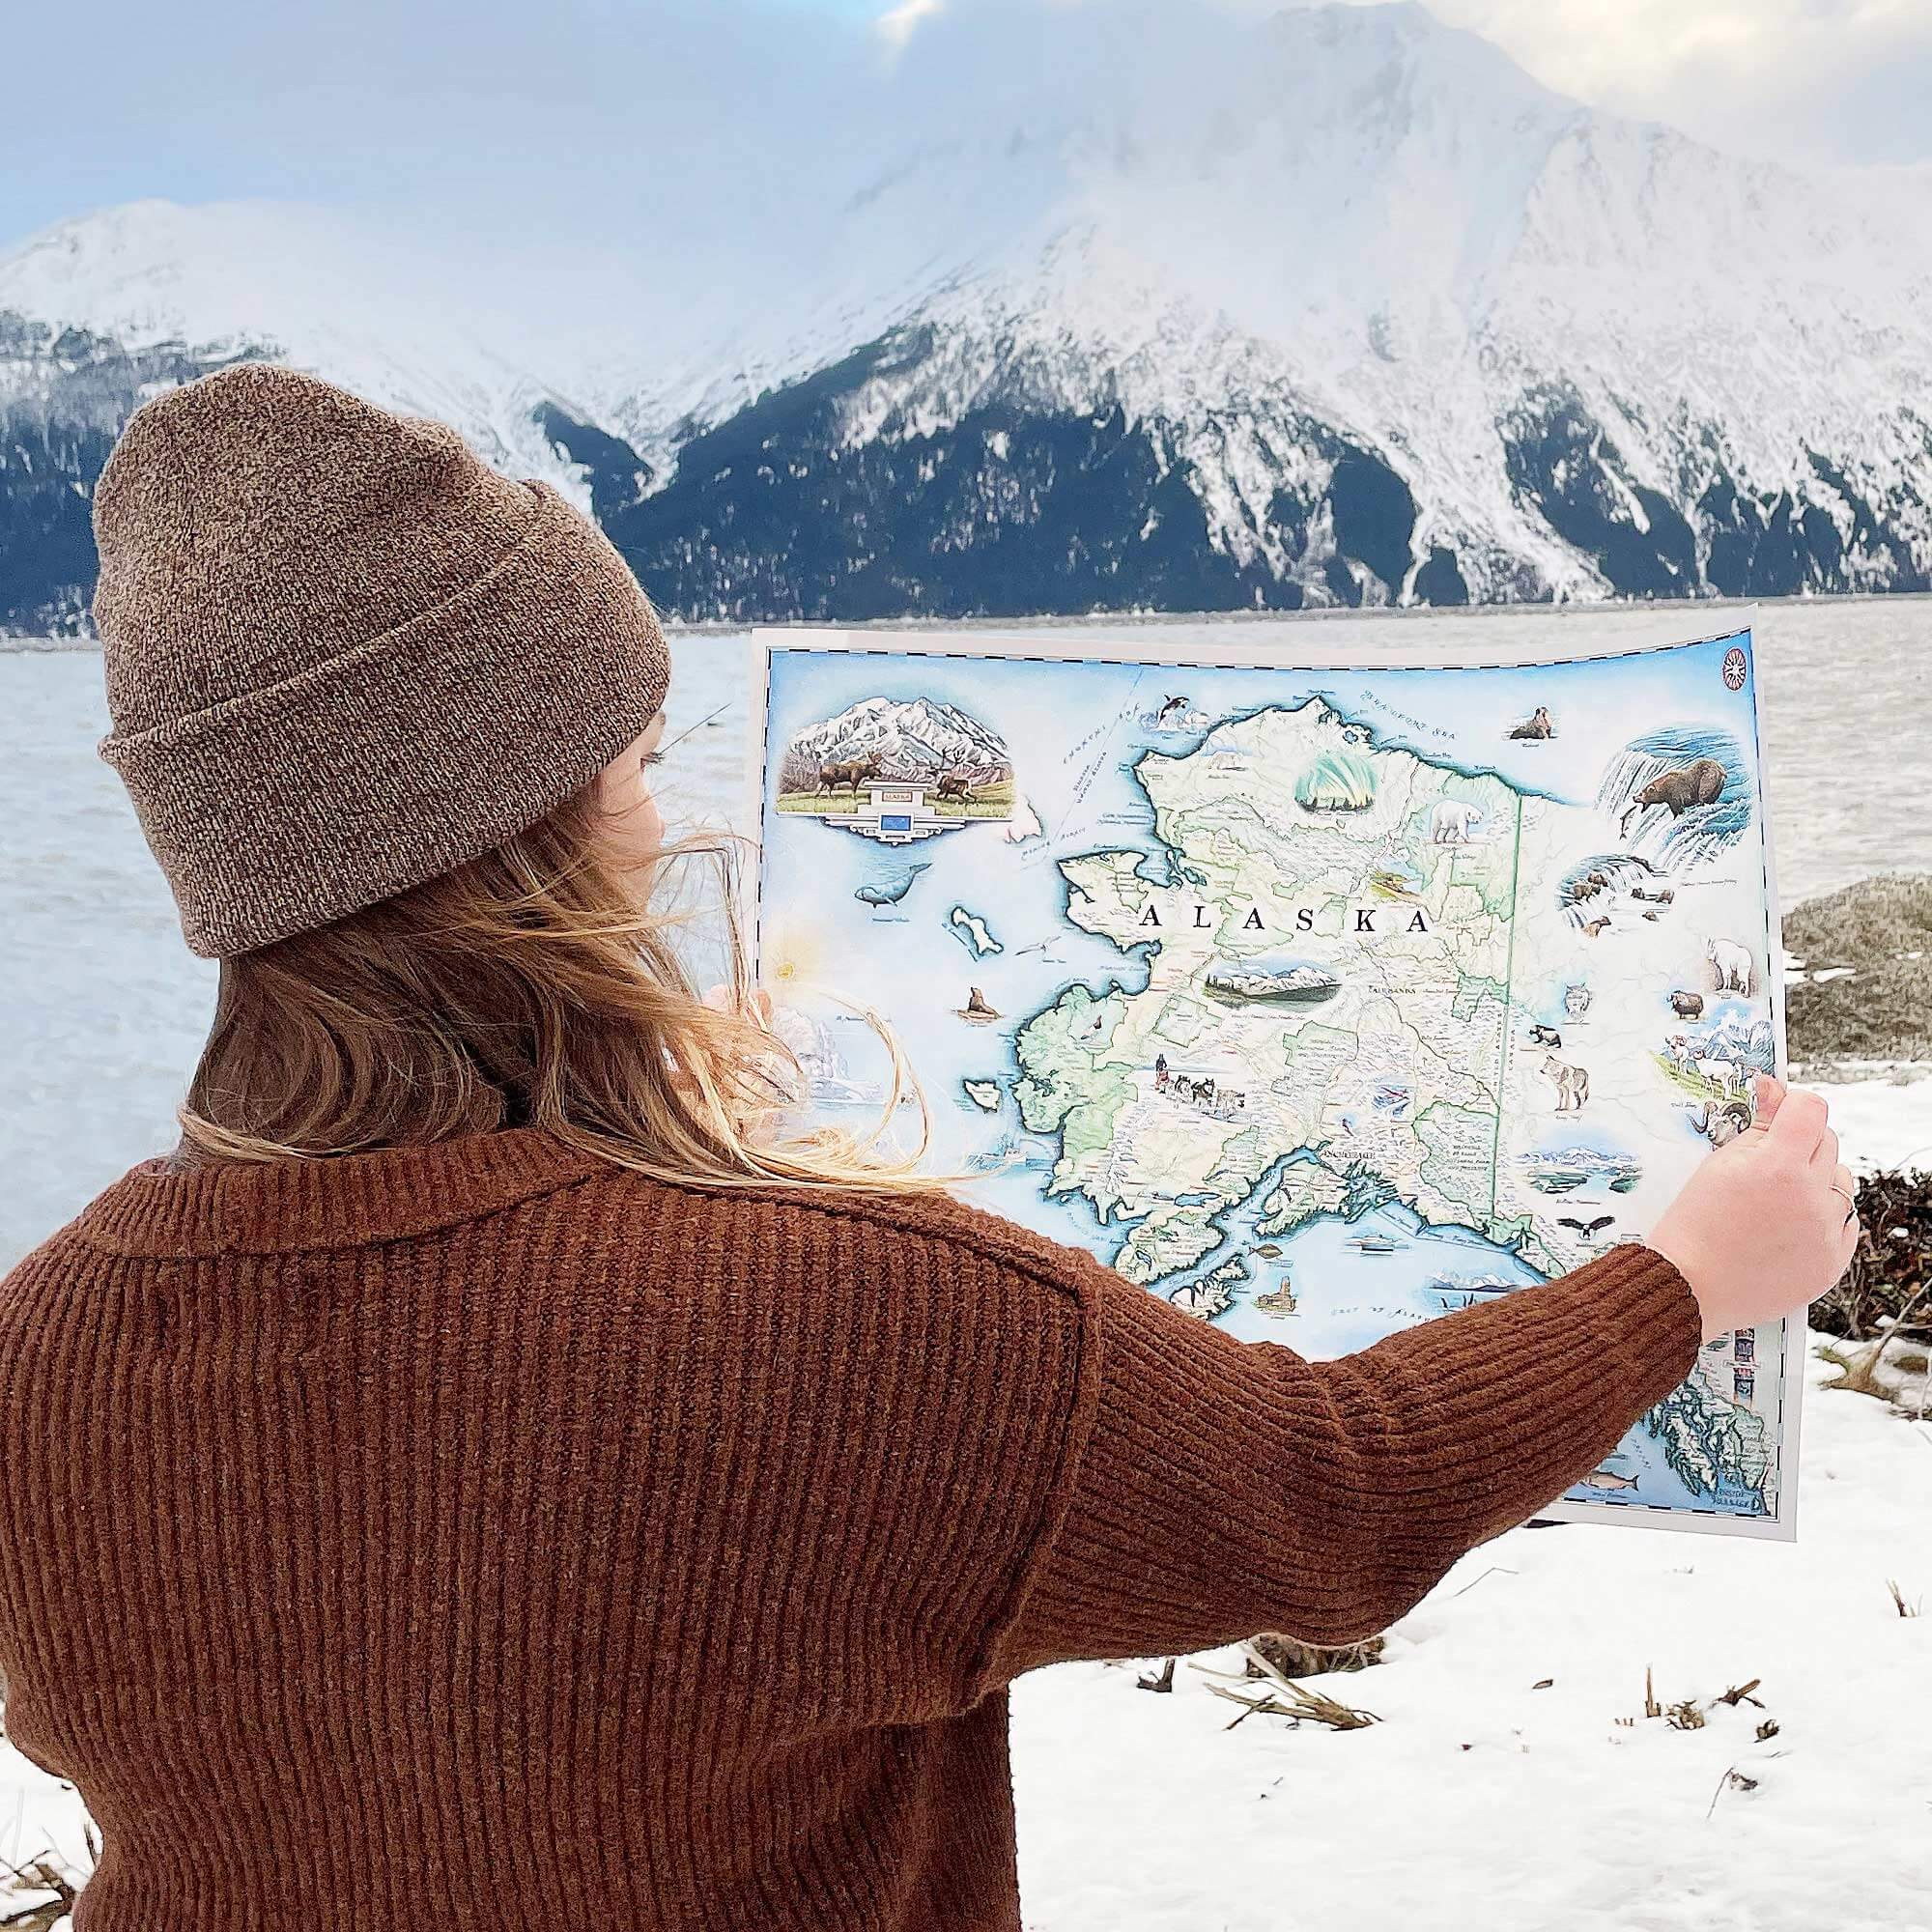 A woman is holding up the Alaska State Xplorer Map in front of mountains on the Turnagain Arm of the Seward Highway.